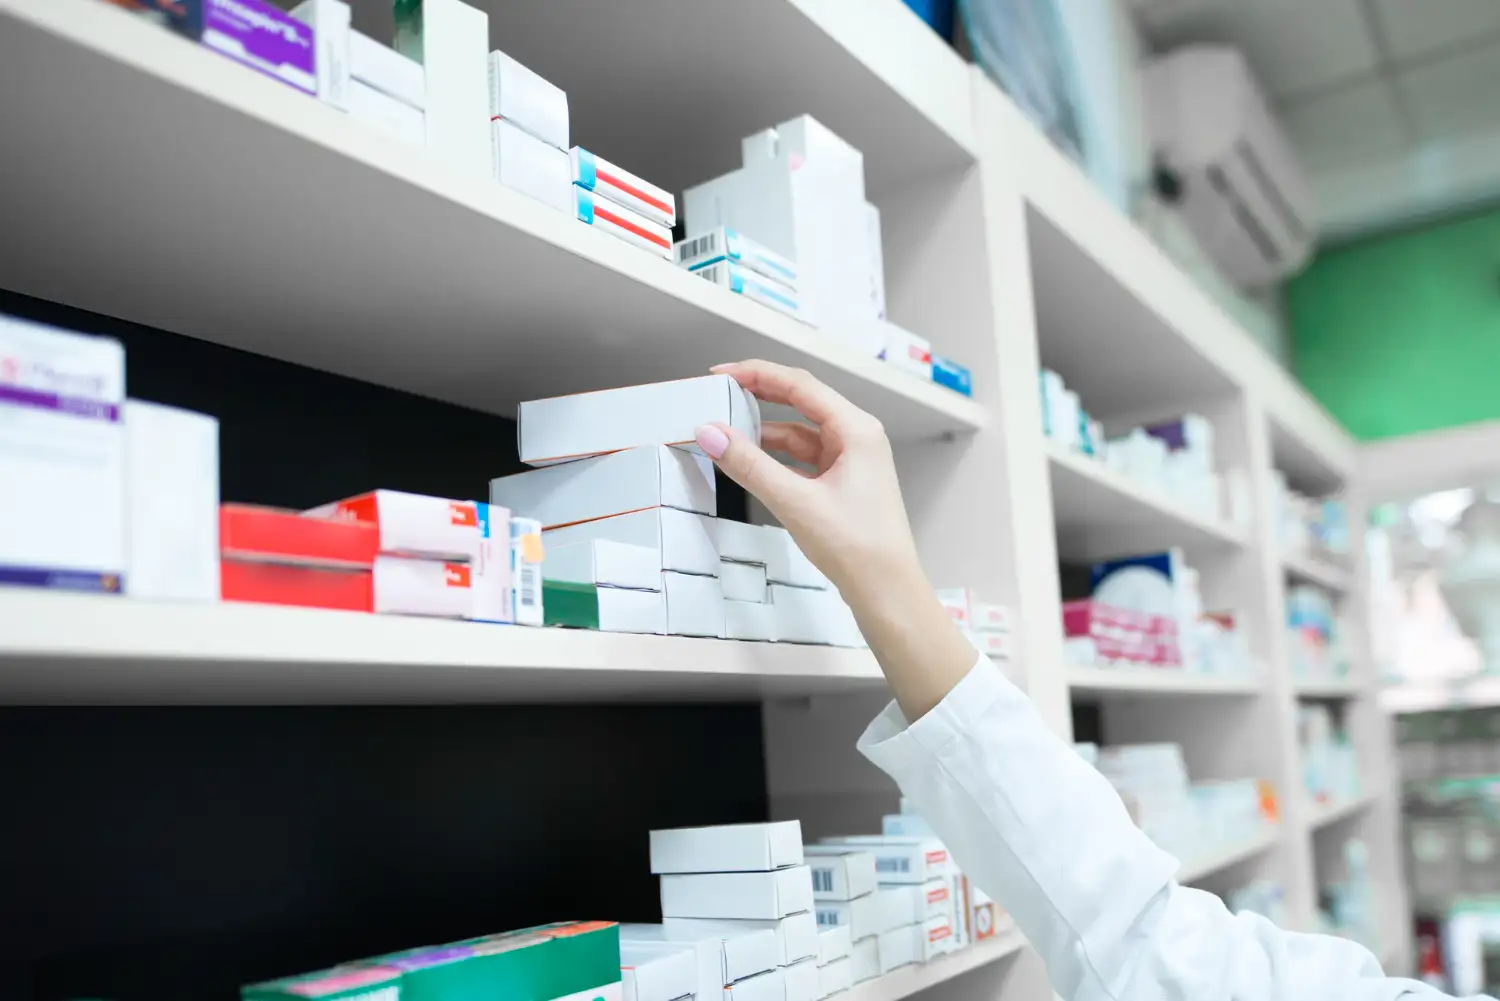 How to set up a pharmacy in Dubai-3a global corporate services provider-uae